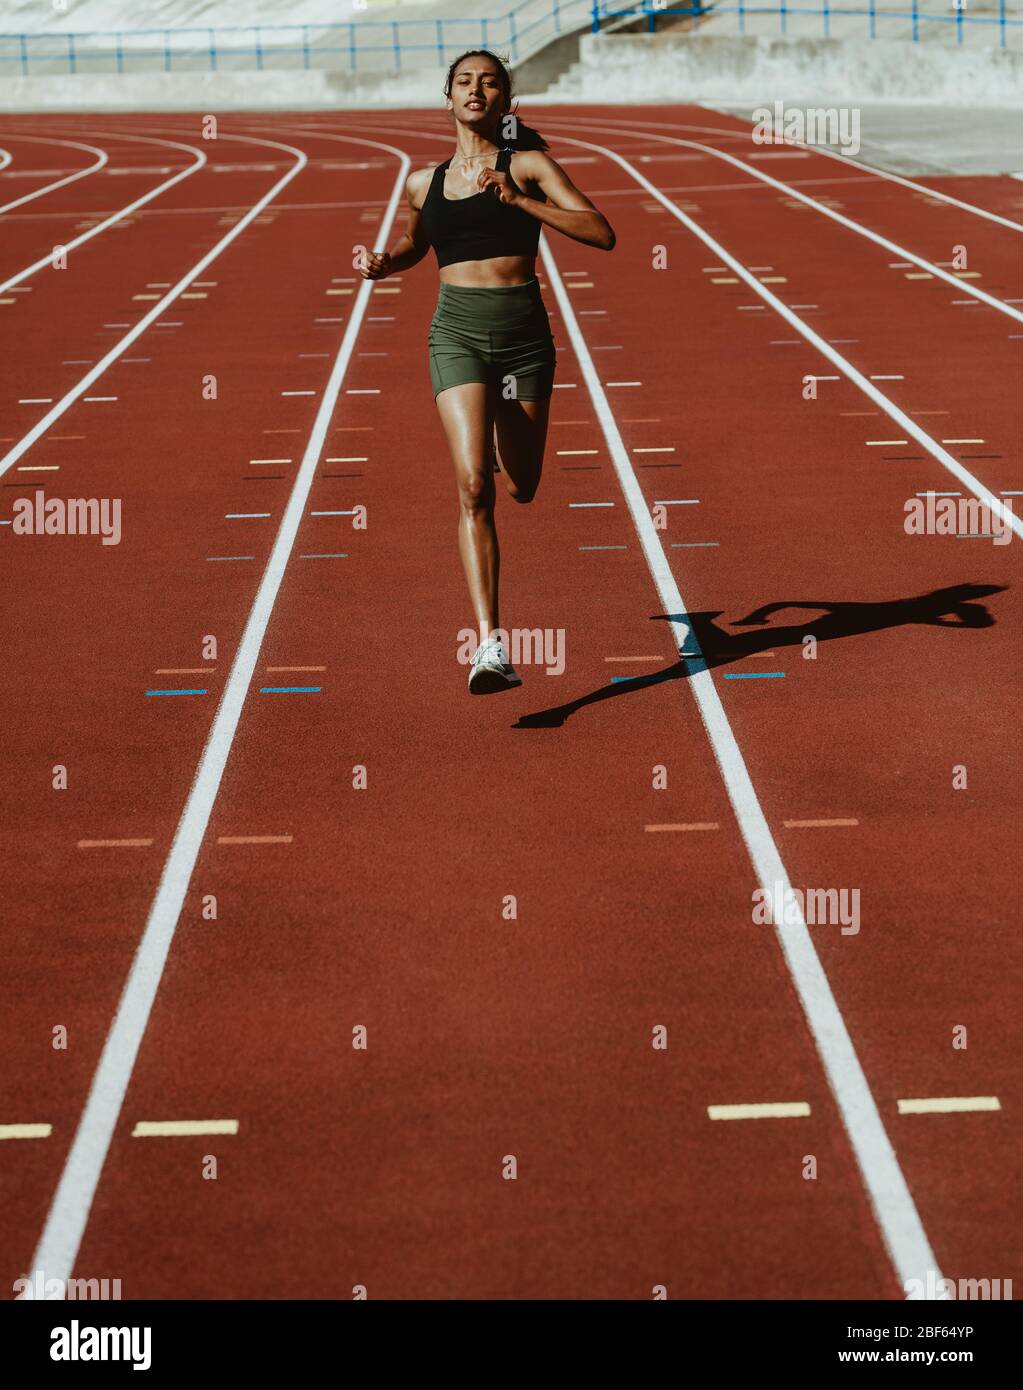 Female athlete sprinting on a running track in a track and field stadium. Woman runner training on a running track. Stock Photo